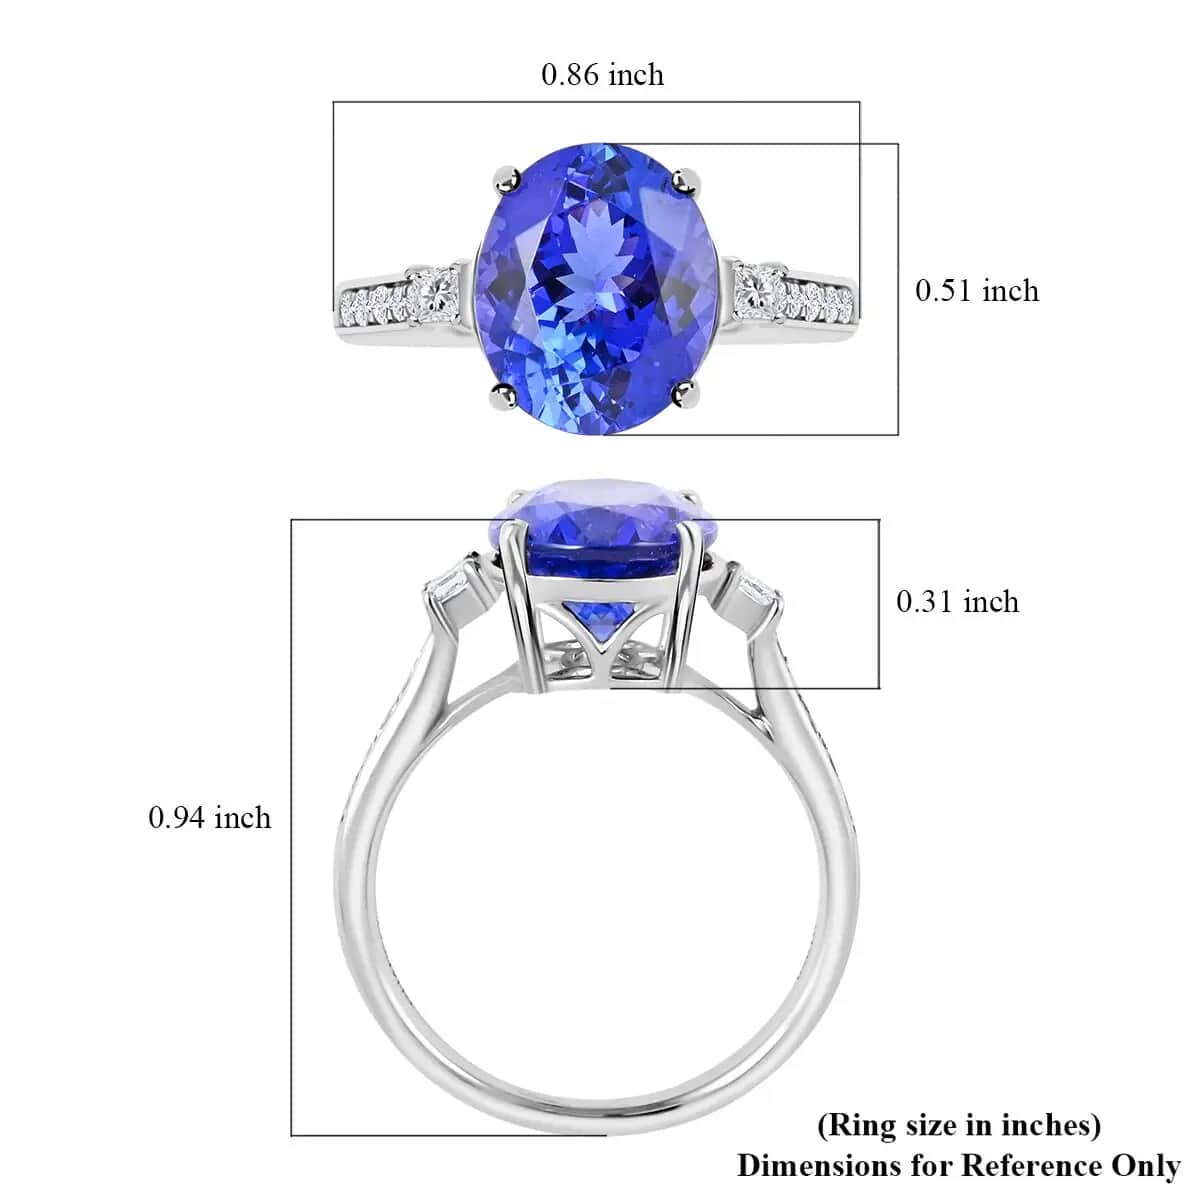 Rhapsody Certified and Appraised AAAA Tanzanite Ring,  E-F VS Diamond Accent Ring,  950 Platinum Ring, Tanzanite Jewelry For Her 5 Grams 4.35 ctw (Size 6) image number 5